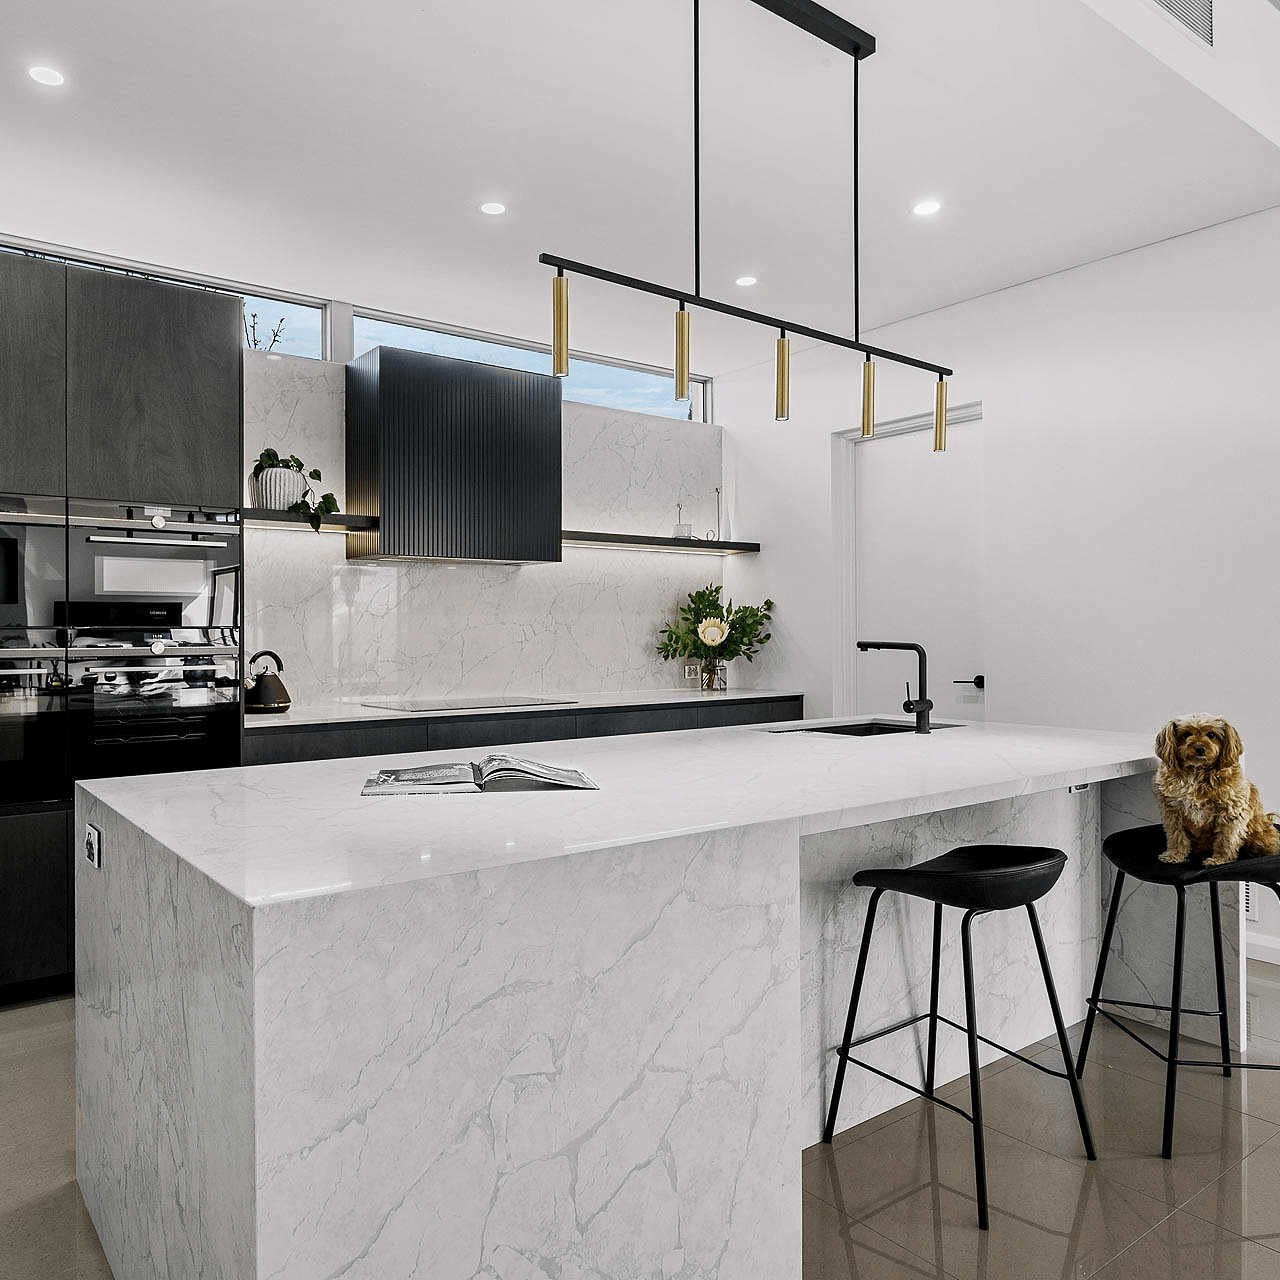 Kitchen Renovations and Designs in Dianella, Perth | The Maker